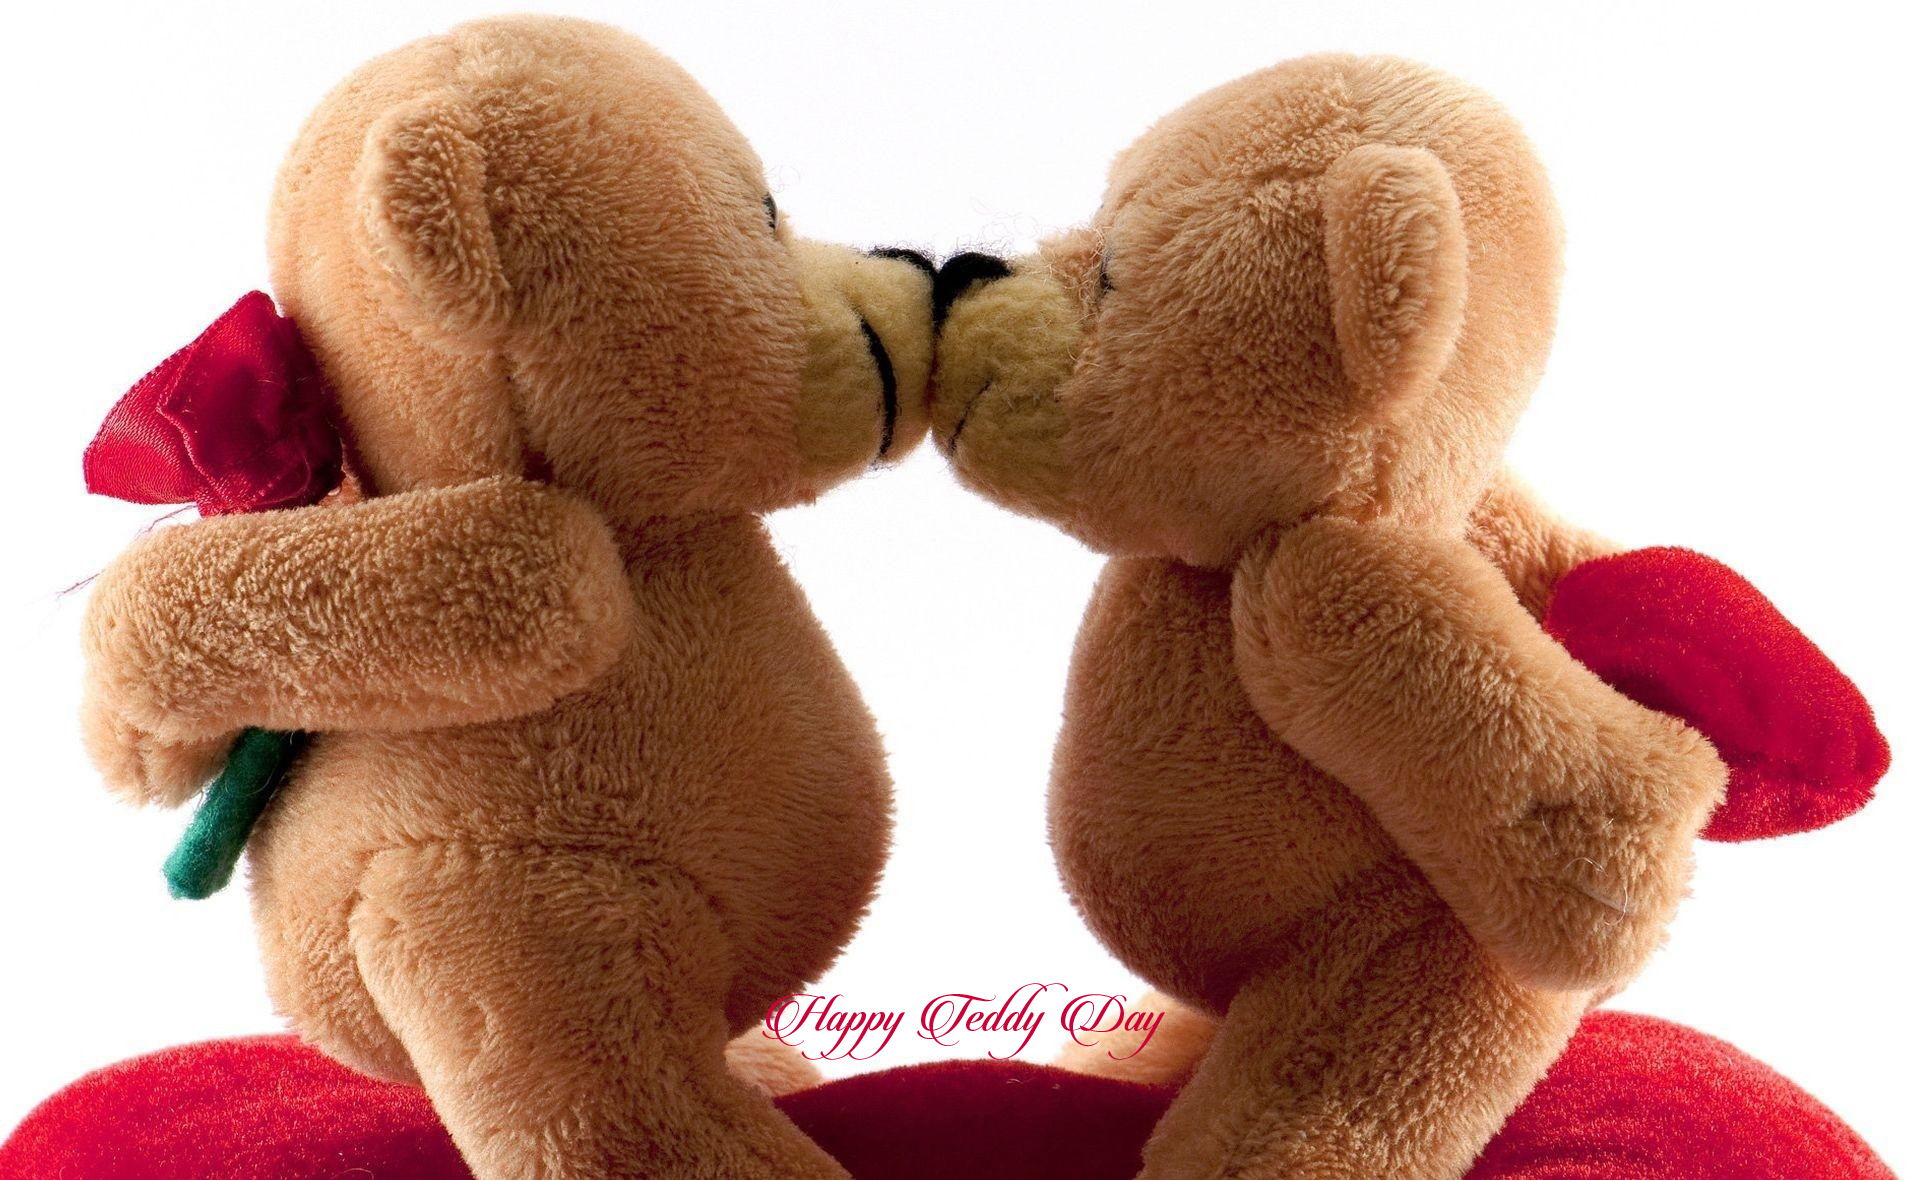 Loverly Teddy Day Status & Messages for Whatsapp & Facebook 